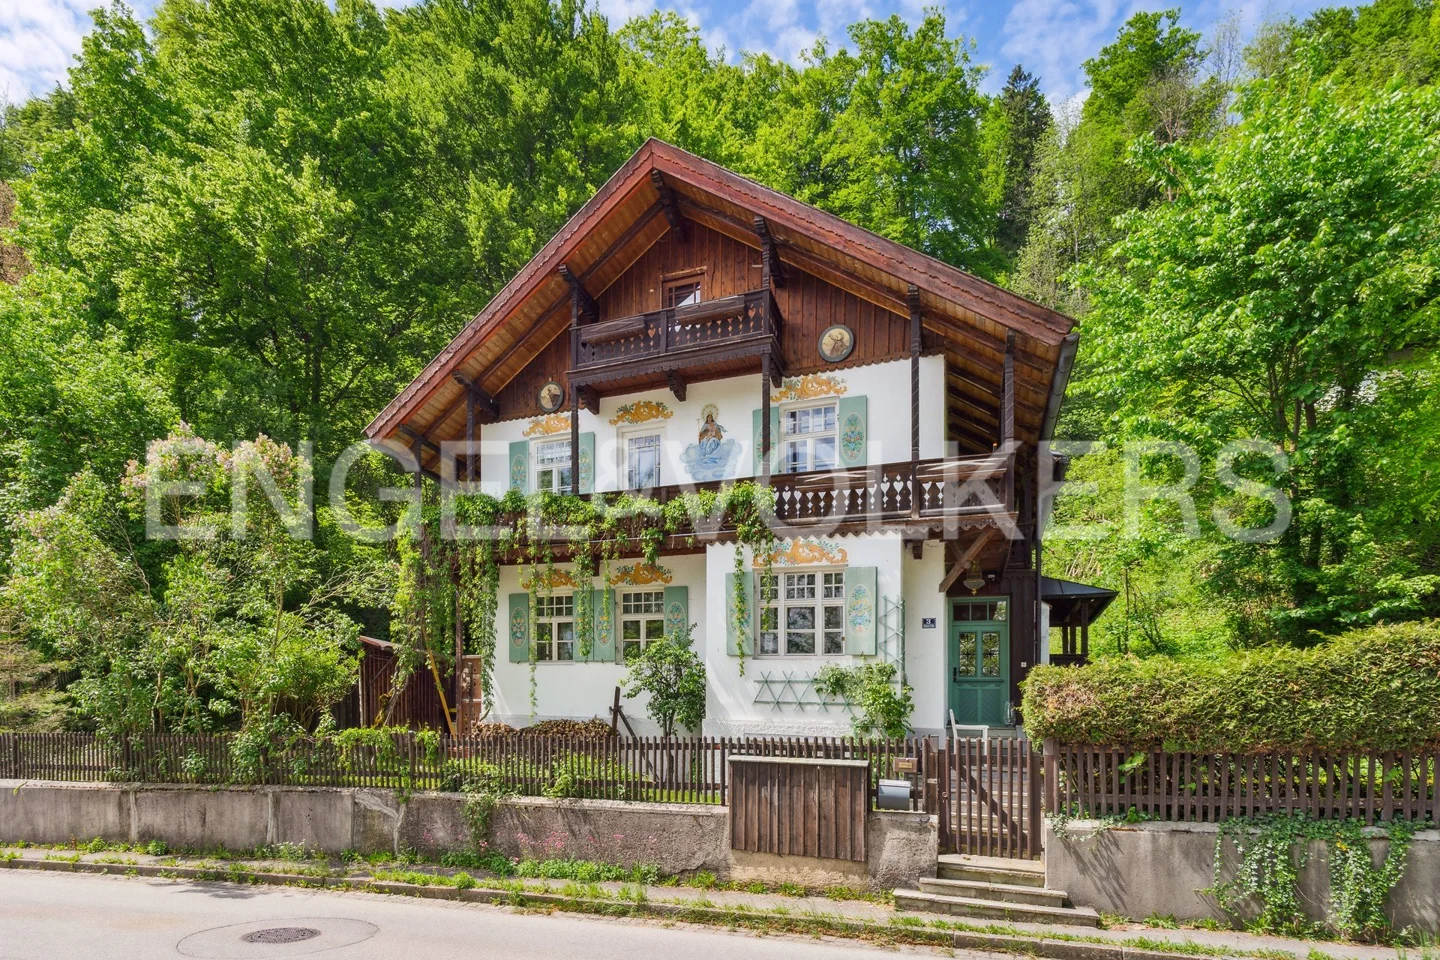 Furnished: Unique country house with charm